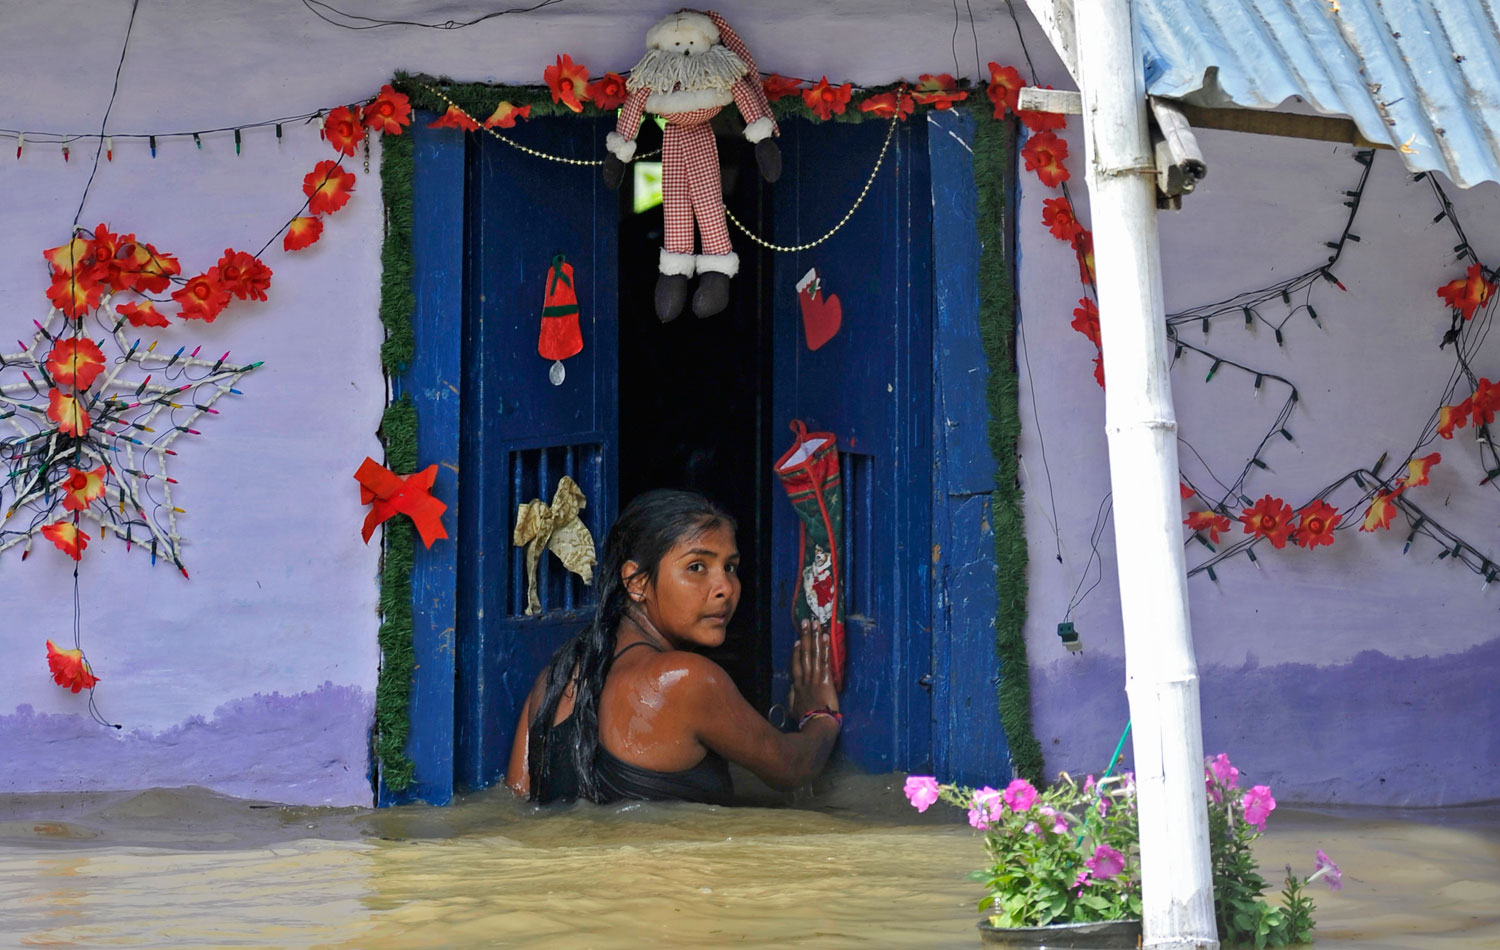 Xiomara Herrera, 13, enters her flooded home in El Porvenir, Colombia,on  Dec. 9, 2011. Torrential rains have caused devastating floods and widespread damage in the country for much of the past two years. Meteorologists blame the rains on La Nina.